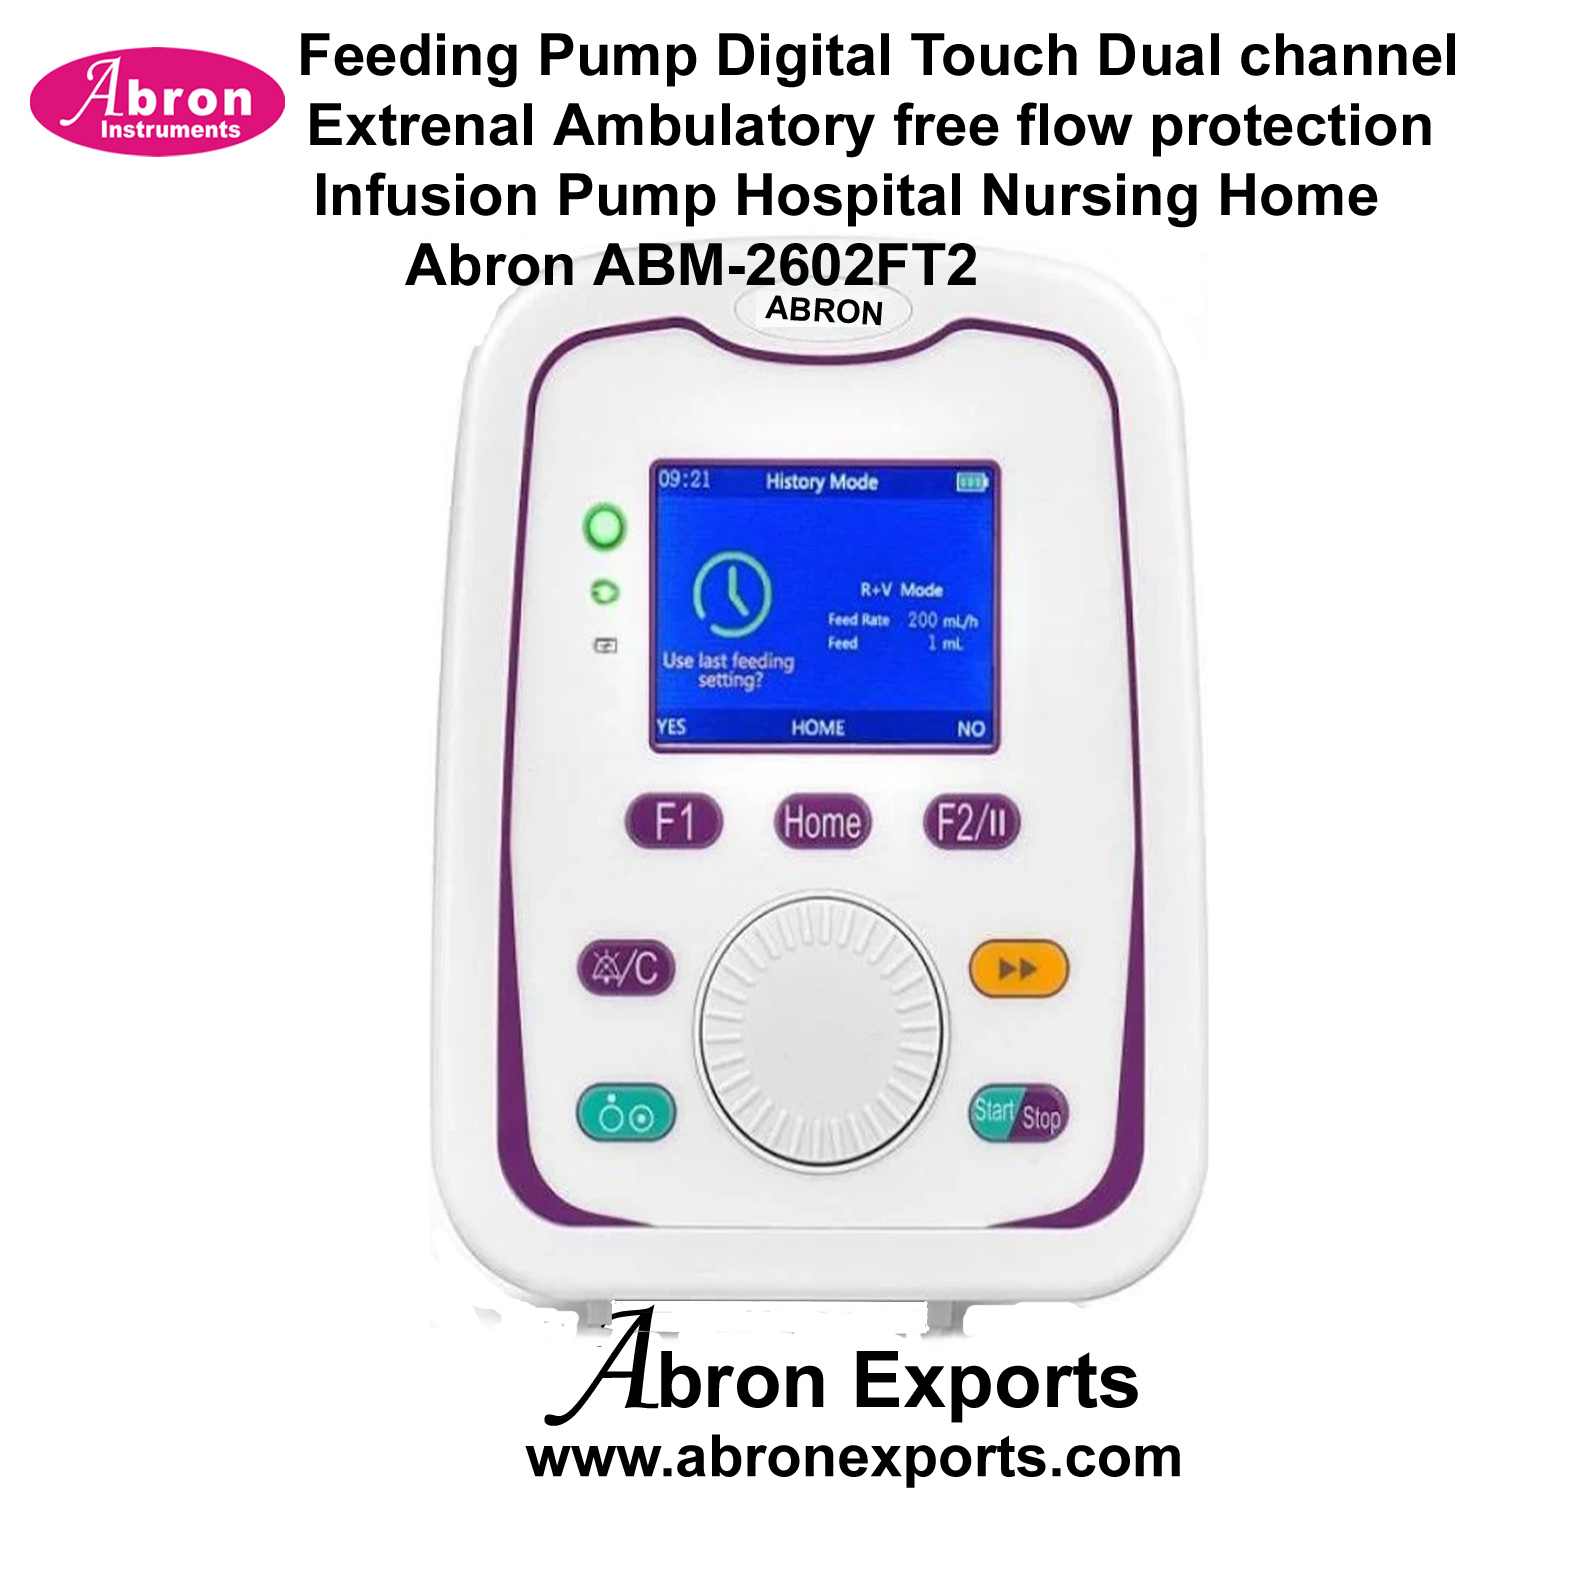 Feeding Pump Digital Touch Dual channel Extrenal Ambulatory free flow protection Infusion Pump Hospital Nursing Home Abron ABM-2602FT2 